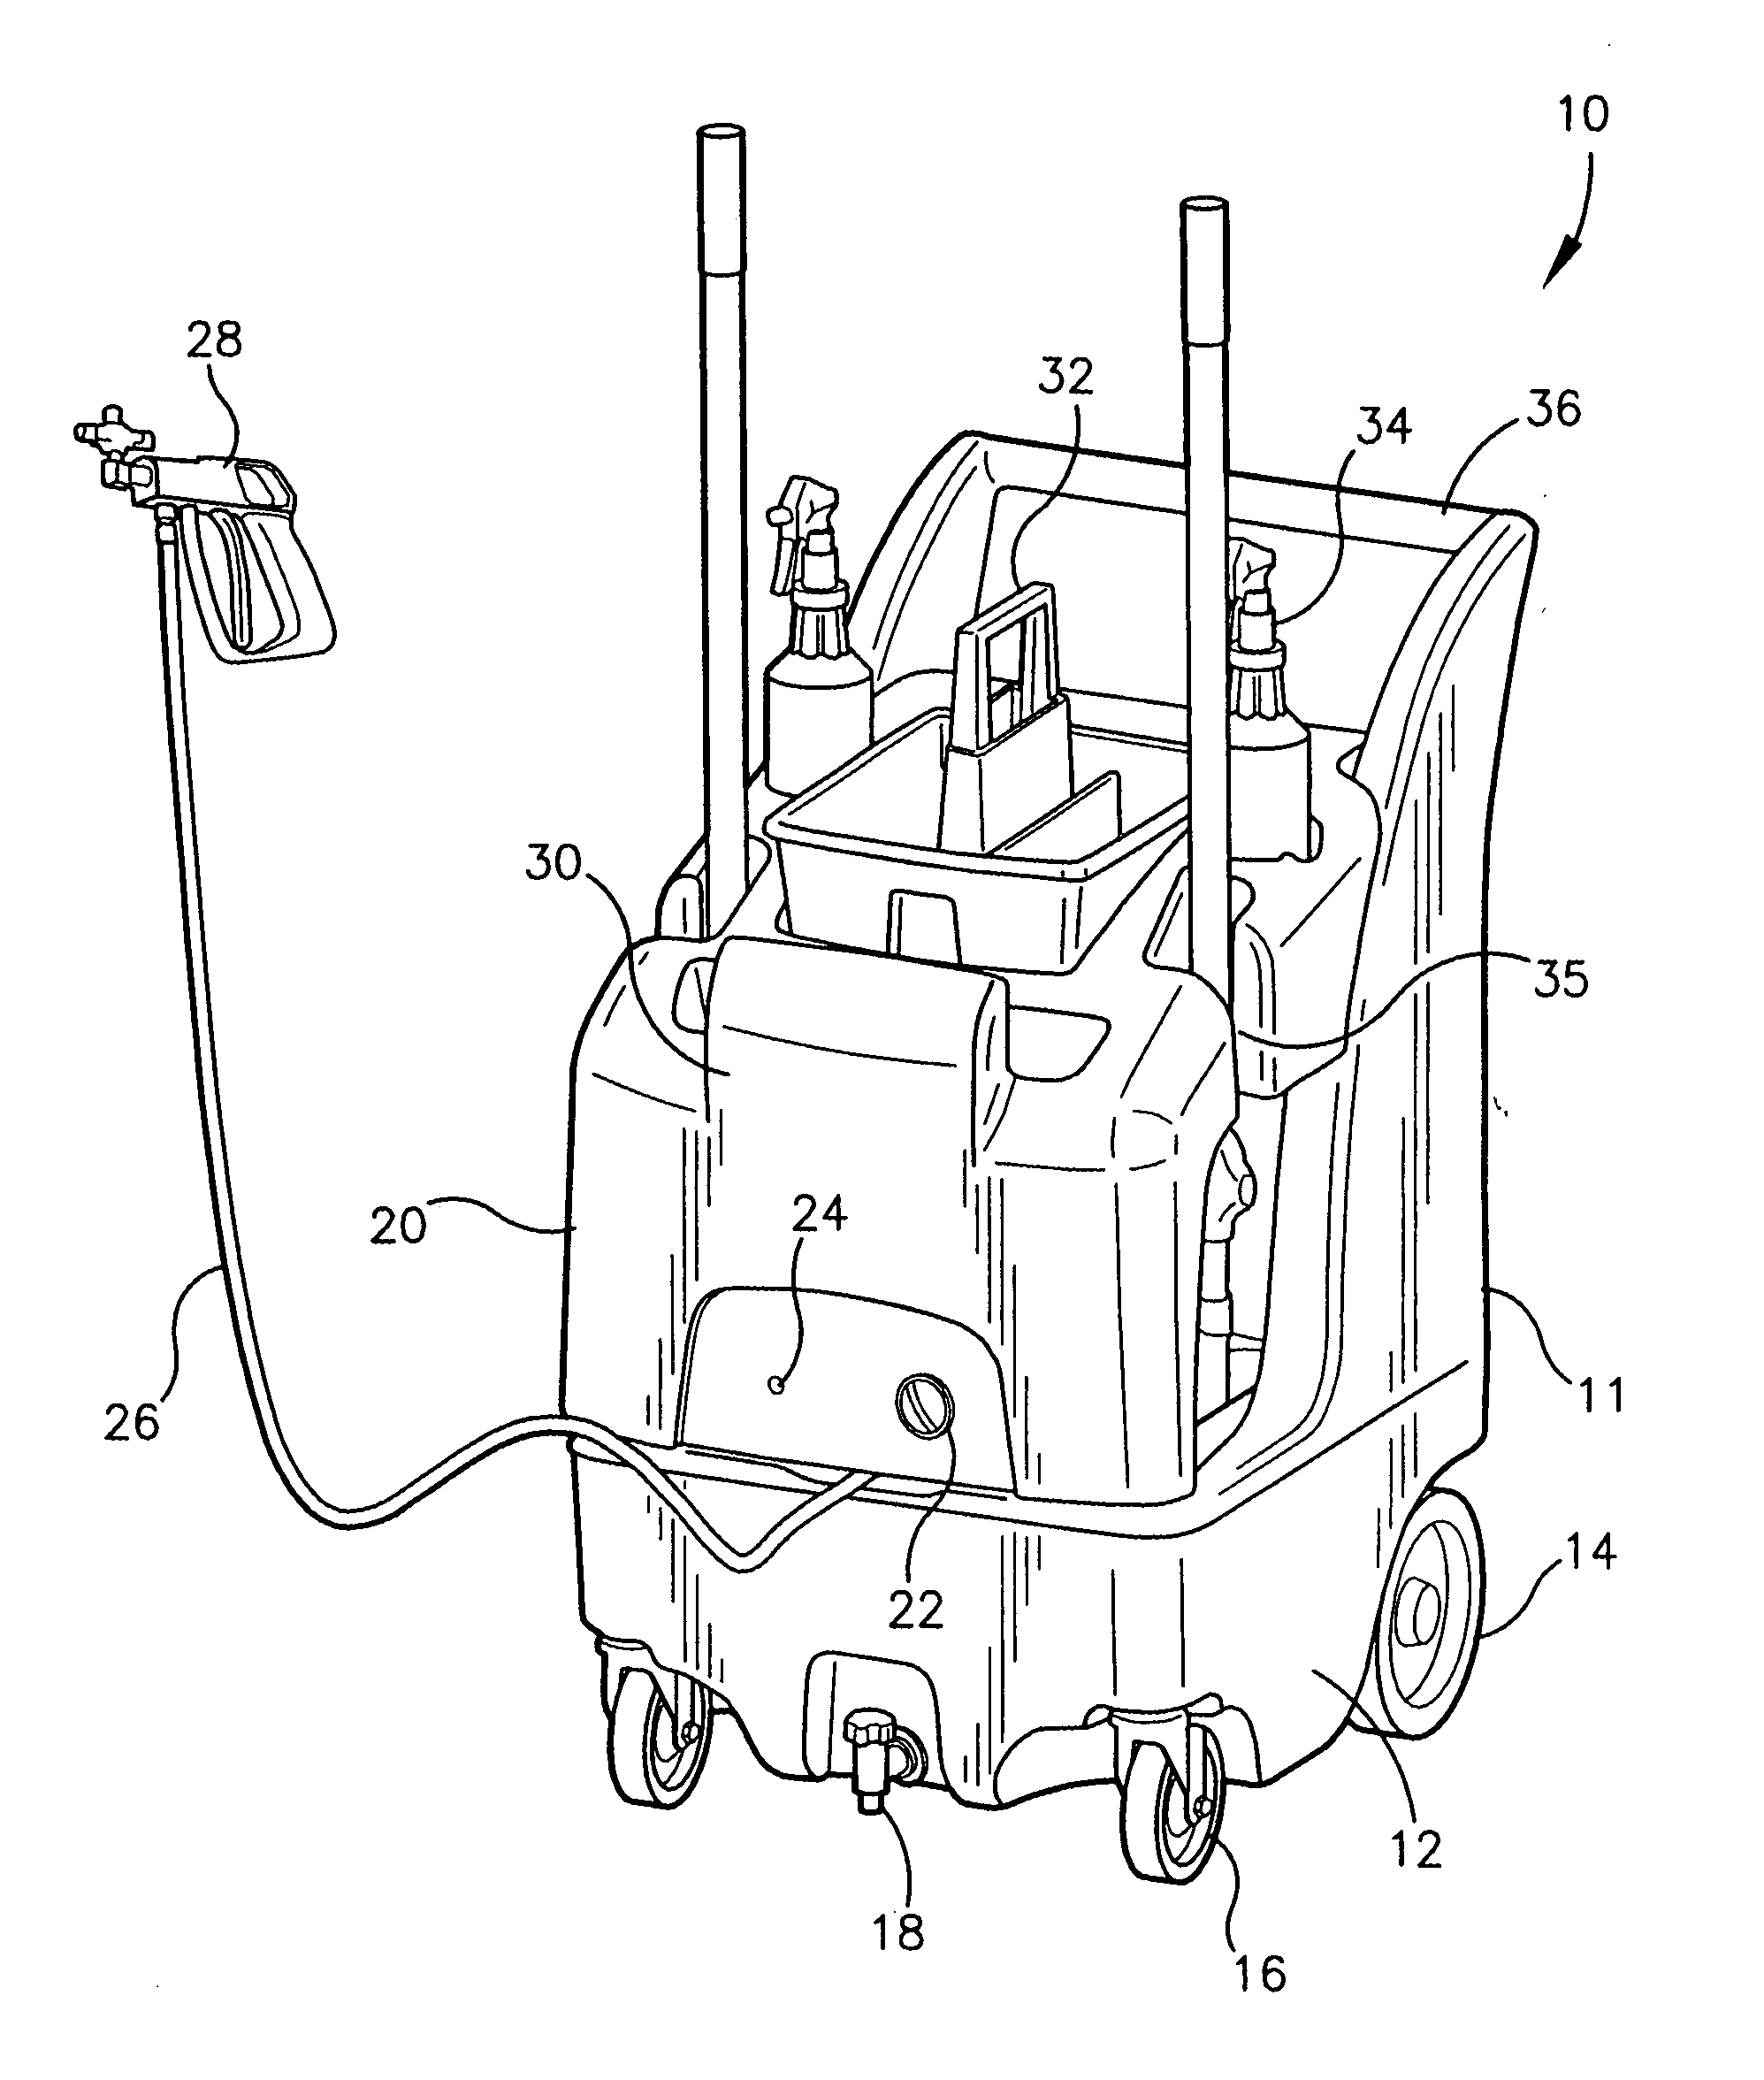 Janitorial handcart with chemical application apparatus